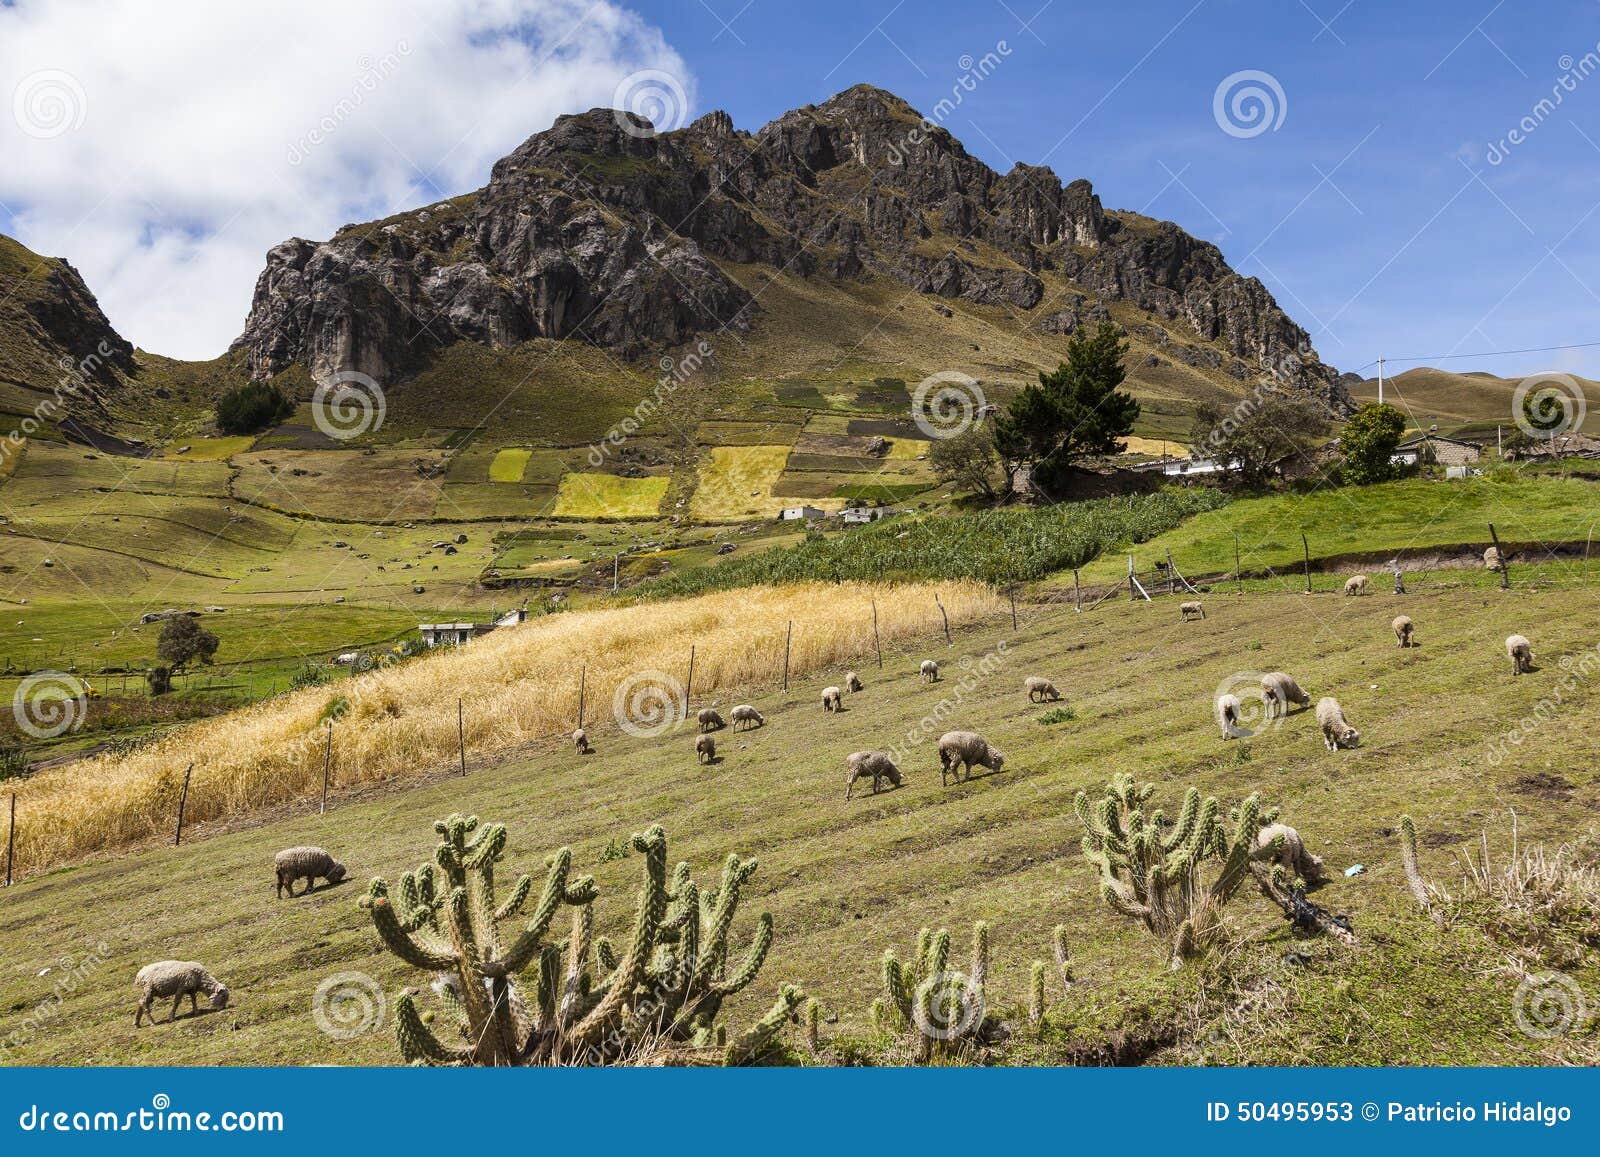 sheep, colorful crops and rocky peaks near zumbahua